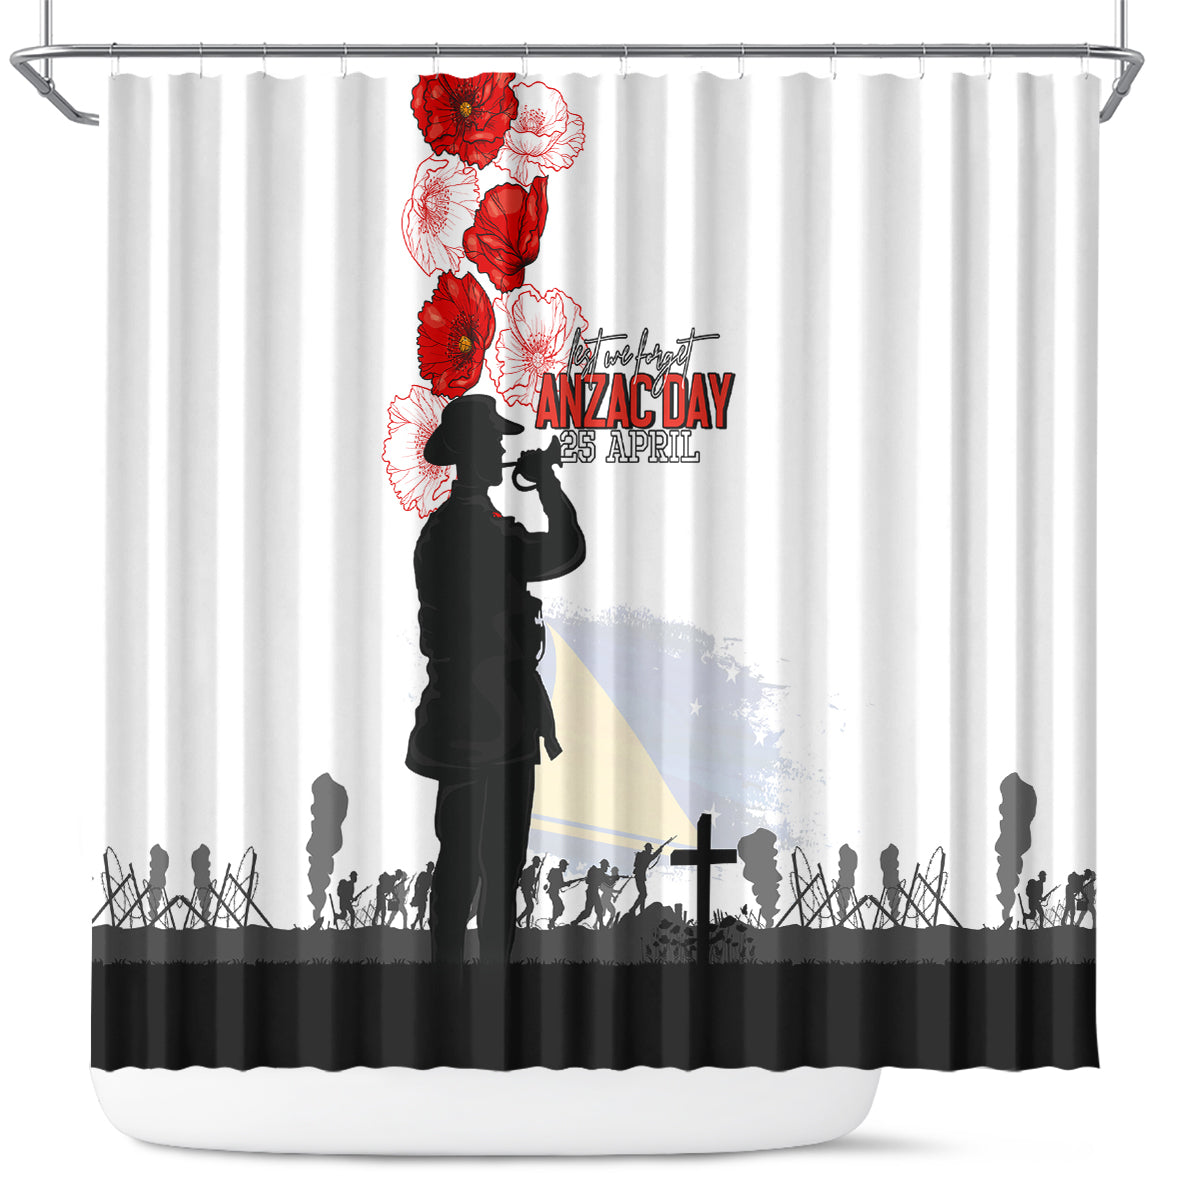 Tokelau ANZAC Day Shower Curtain Lest We Forget Red Poppy Flowers and Soldier LT03 White - Polynesian Pride